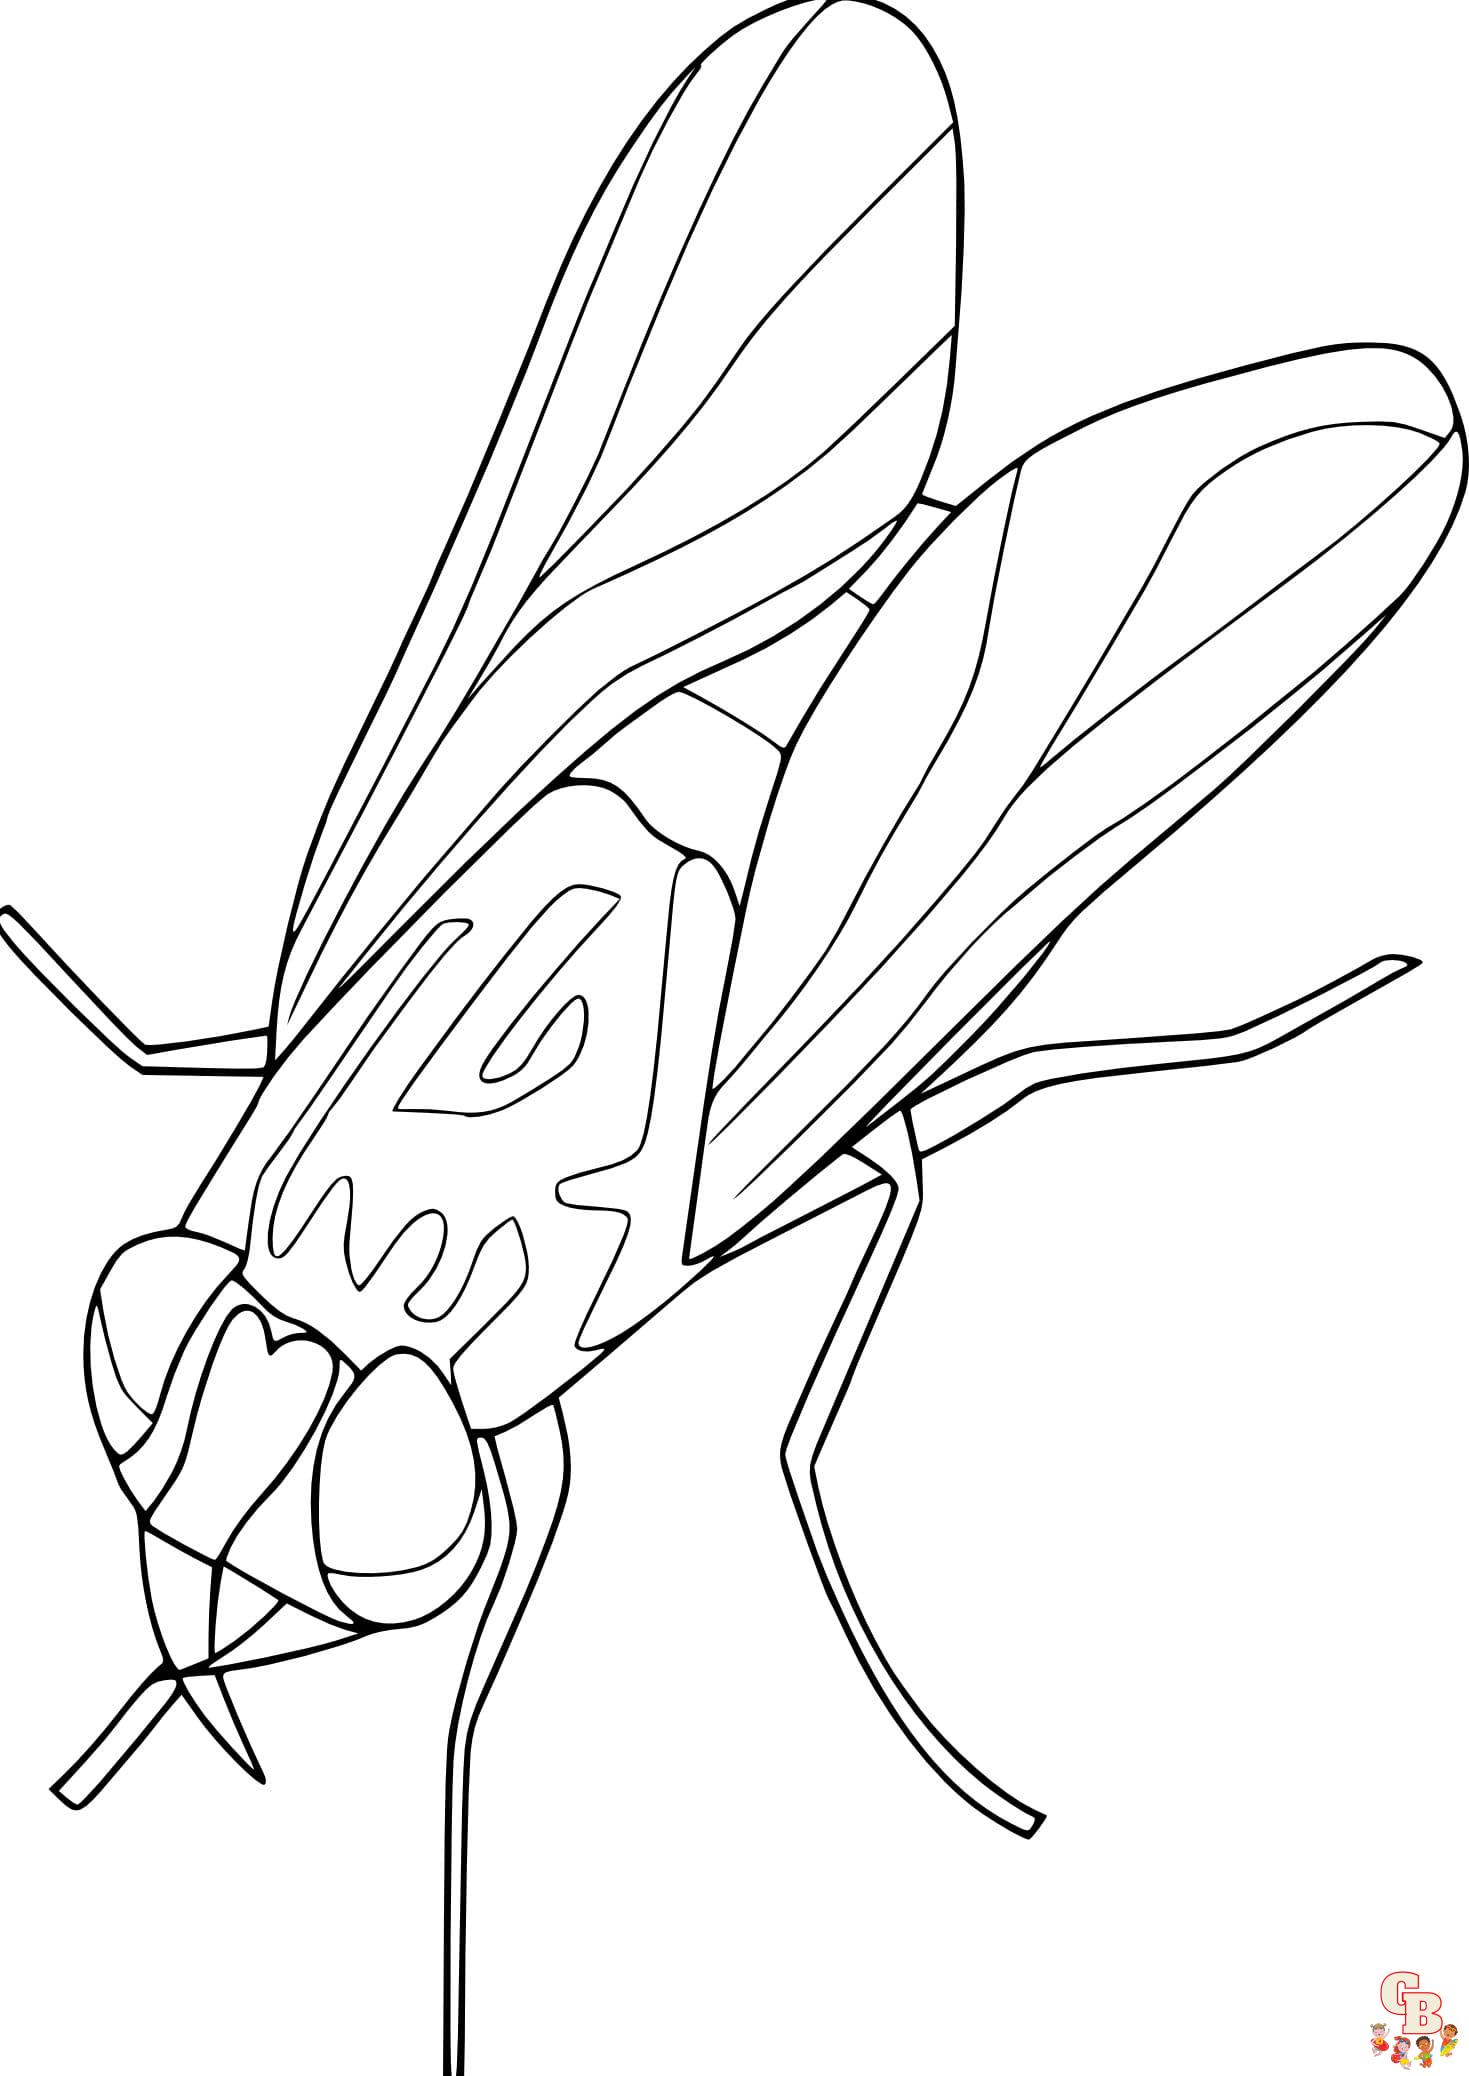 Free Fly coloring pages for kids